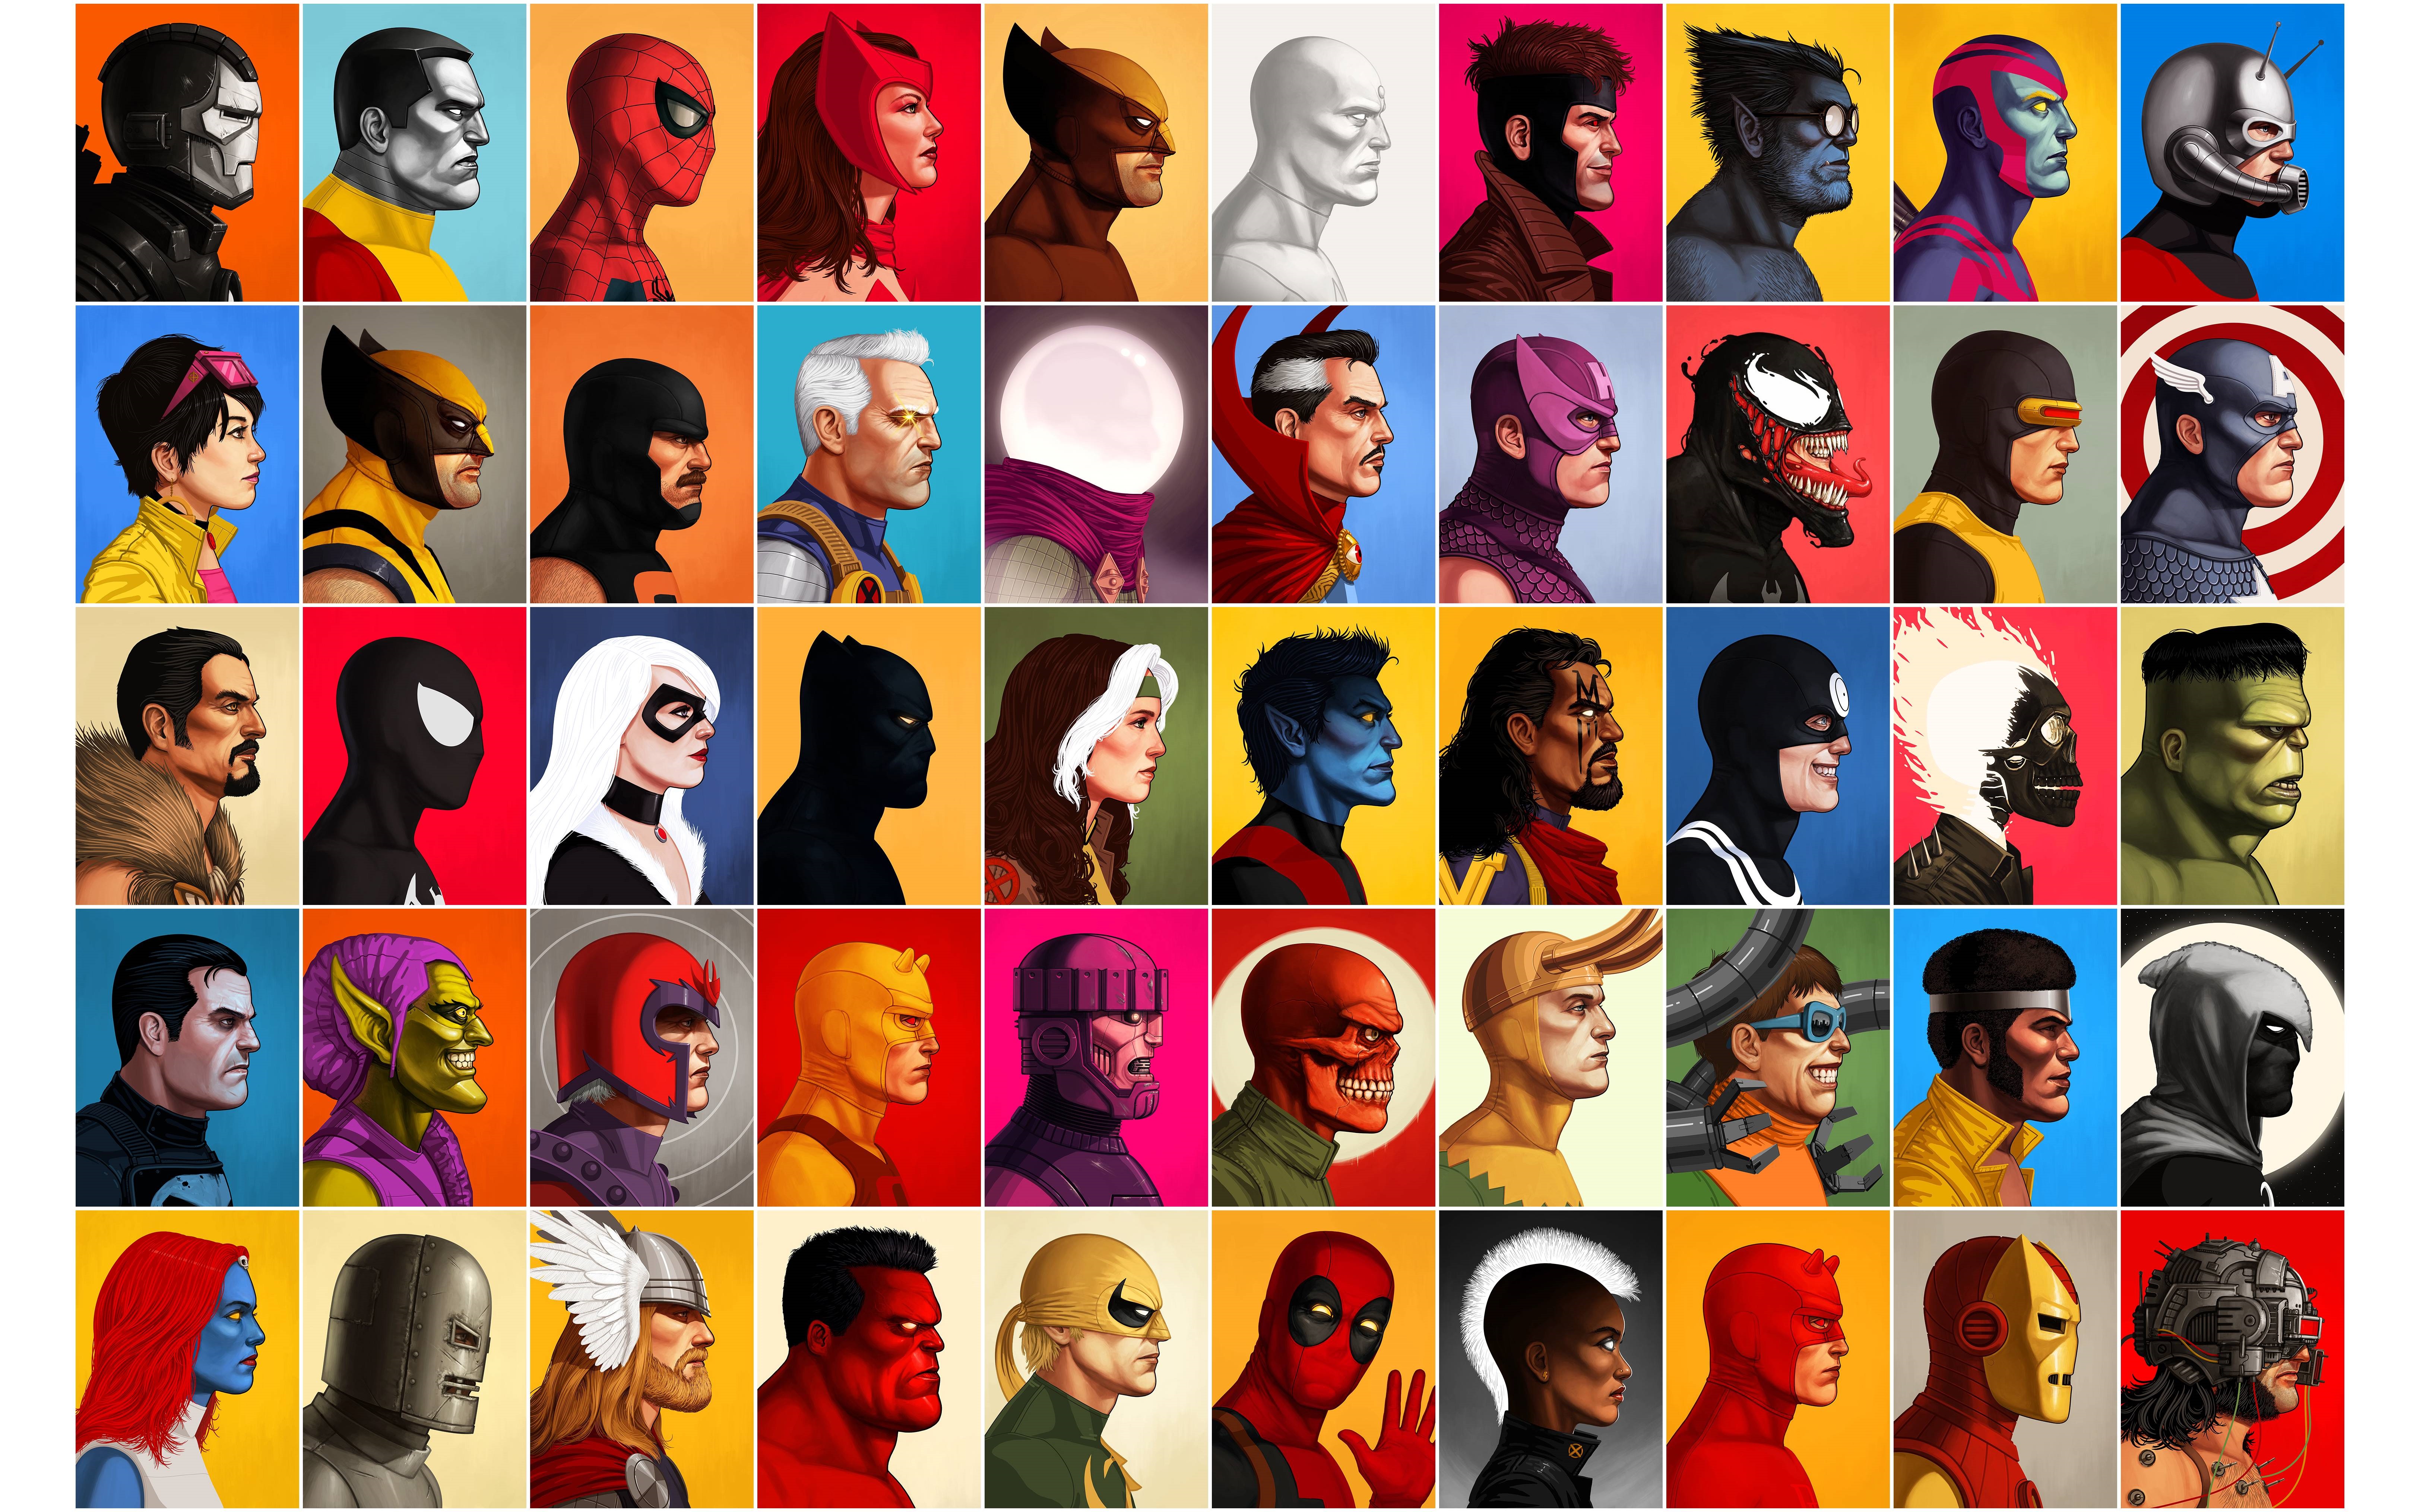 Comics Collage 4k Ultra HD Wallpaper by Mike Mitchell